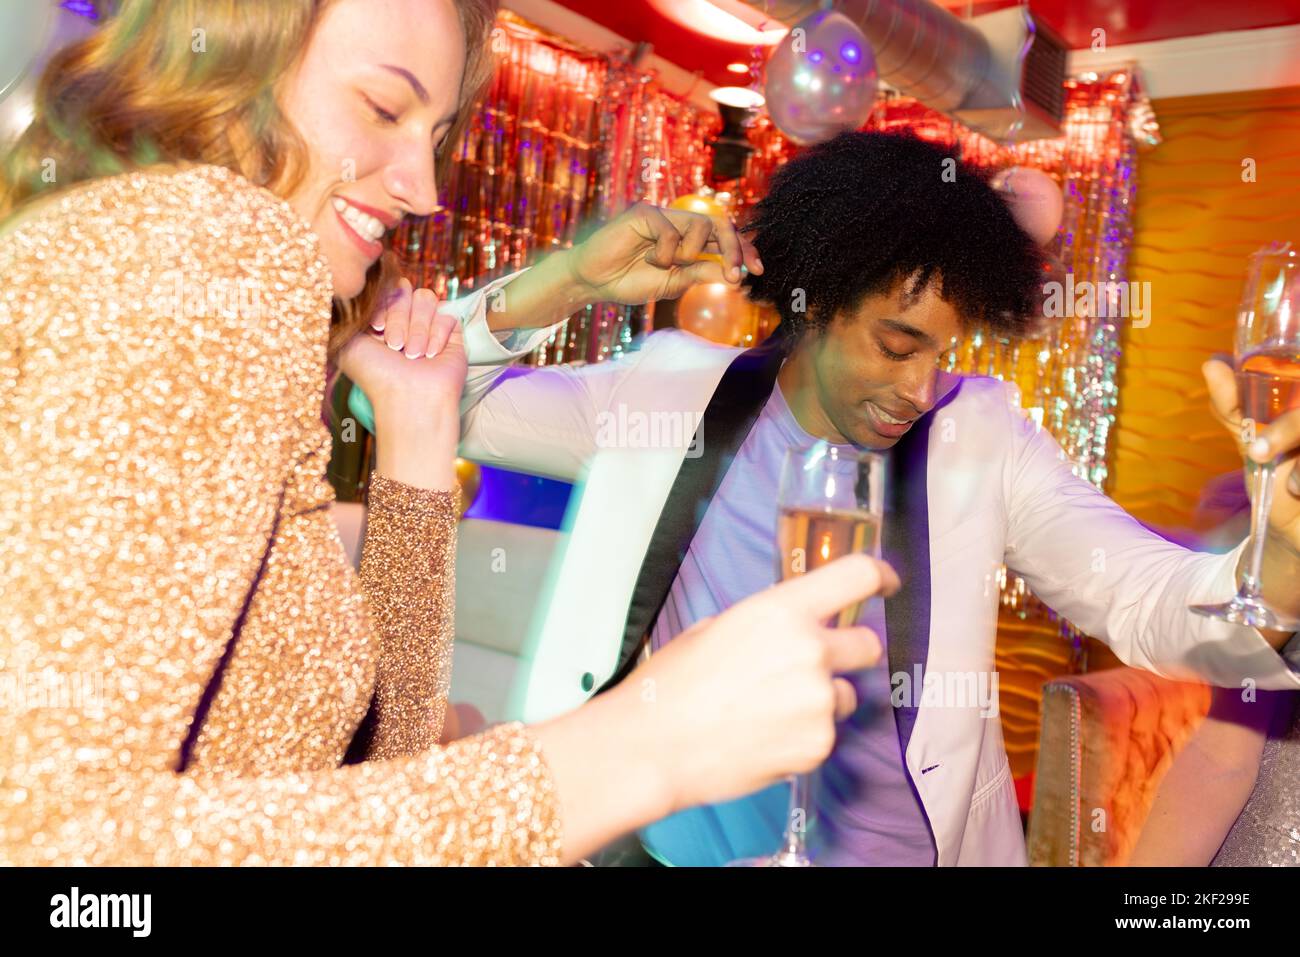 Happy diverse couple dancing and drinking champagne at a nightclub. Fun, drinking, going out, inclusivity and party concept. Stock Photo